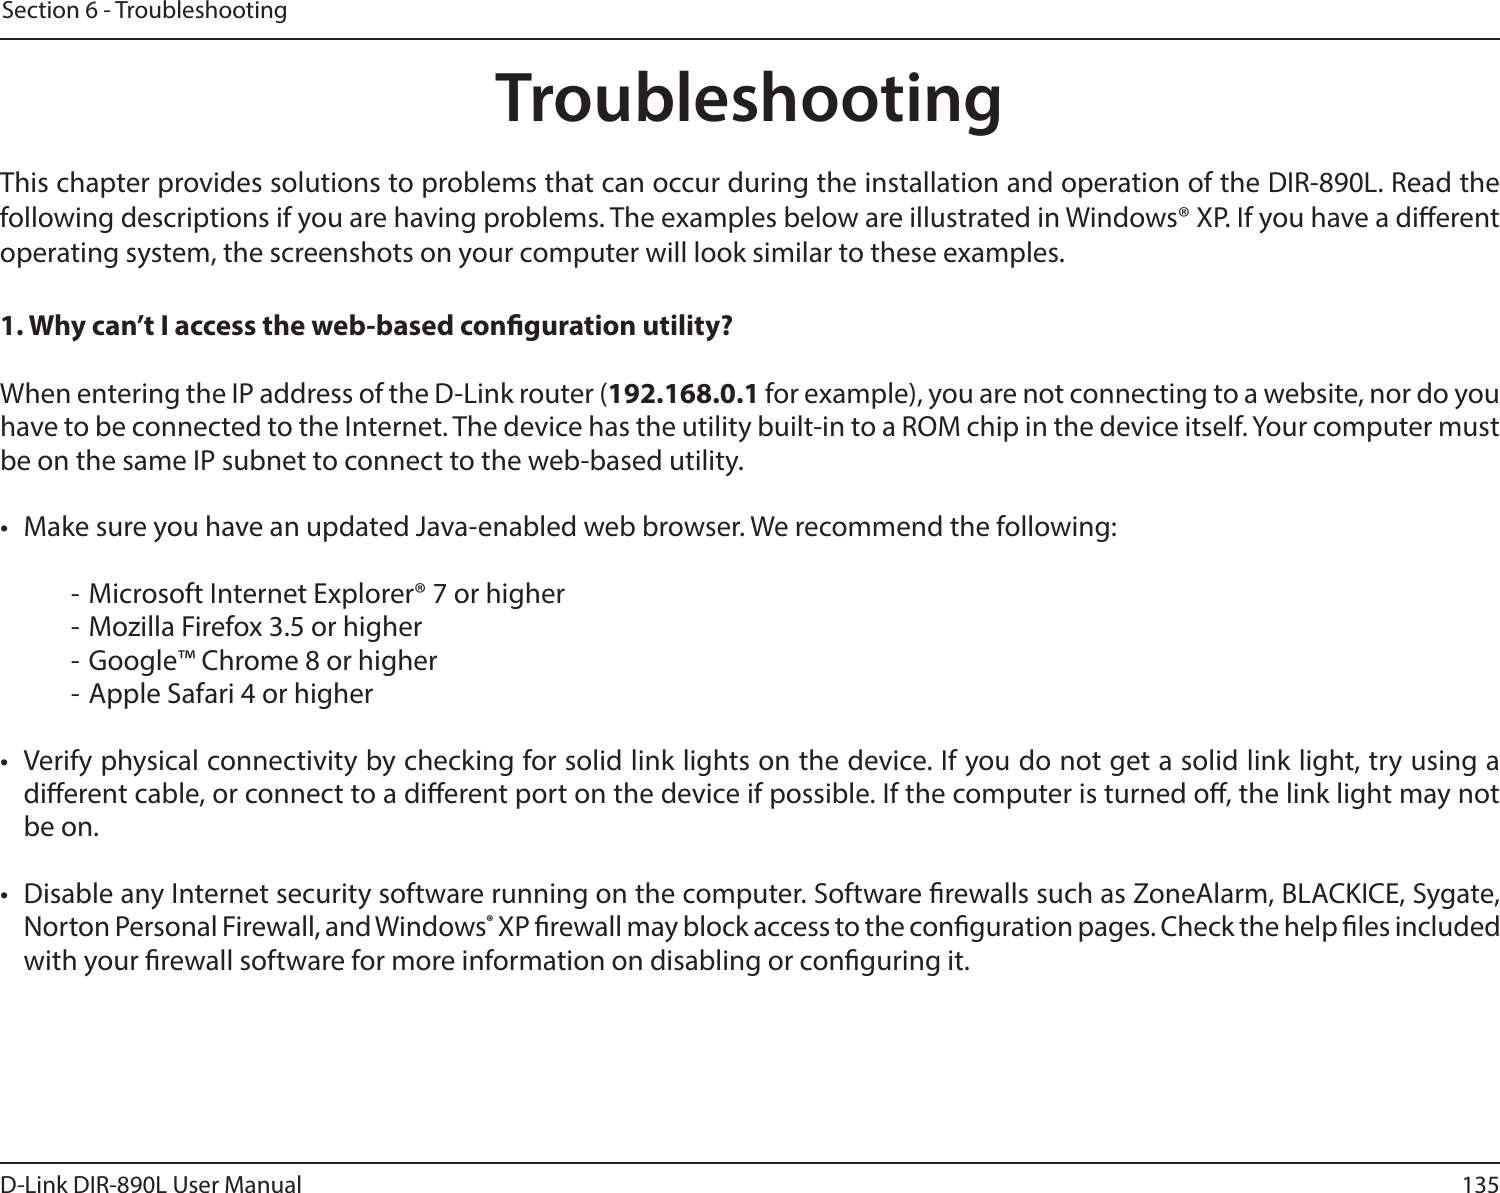 135D-Link DIR-890L User ManualSection 6 - TroubleshootingTroubleshootingThis chapter provides solutions to problems that can occur during the installation and operation of the DIR-890L. Read the following descriptions if you are having problems. The examples below are illustrated in Windows® XP. If you have a dierent operating system, the screenshots on your computer will look similar to these examples.1. Why can’t I access the web-based conguration utility?When entering the IP address of the D-Link router (192.168.0.1 for example), you are not connecting to a website, nor do you have to be connected to the Internet. The device has the utility built-in to a ROM chip in the device itself. Your computer must be on the same IP subnet to connect to the web-based utility. •  Make sure you have an updated Java-enabled web browser. We recommend the following:  - Microsoft Internet Explorer® 7 or higher- Mozilla Firefox 3.5 or higher- Google™ Chrome 8 or higher- Apple Safari 4 or higher•  Verify physical connectivity by checking for solid link lights on the device. If you do not get a solid link light, try using a dierent cable, or connect to a dierent port on the device if possible. If the computer is turned o, the link light may not be on.•  Disable any Internet security software running on the computer. Software rewalls such as ZoneAlarm, BLACKICE, Sygate, Norton Personal Firewall, and Windows® XP rewall may block access to the conguration pages. Check the help les included with your rewall software for more information on disabling or conguring it.